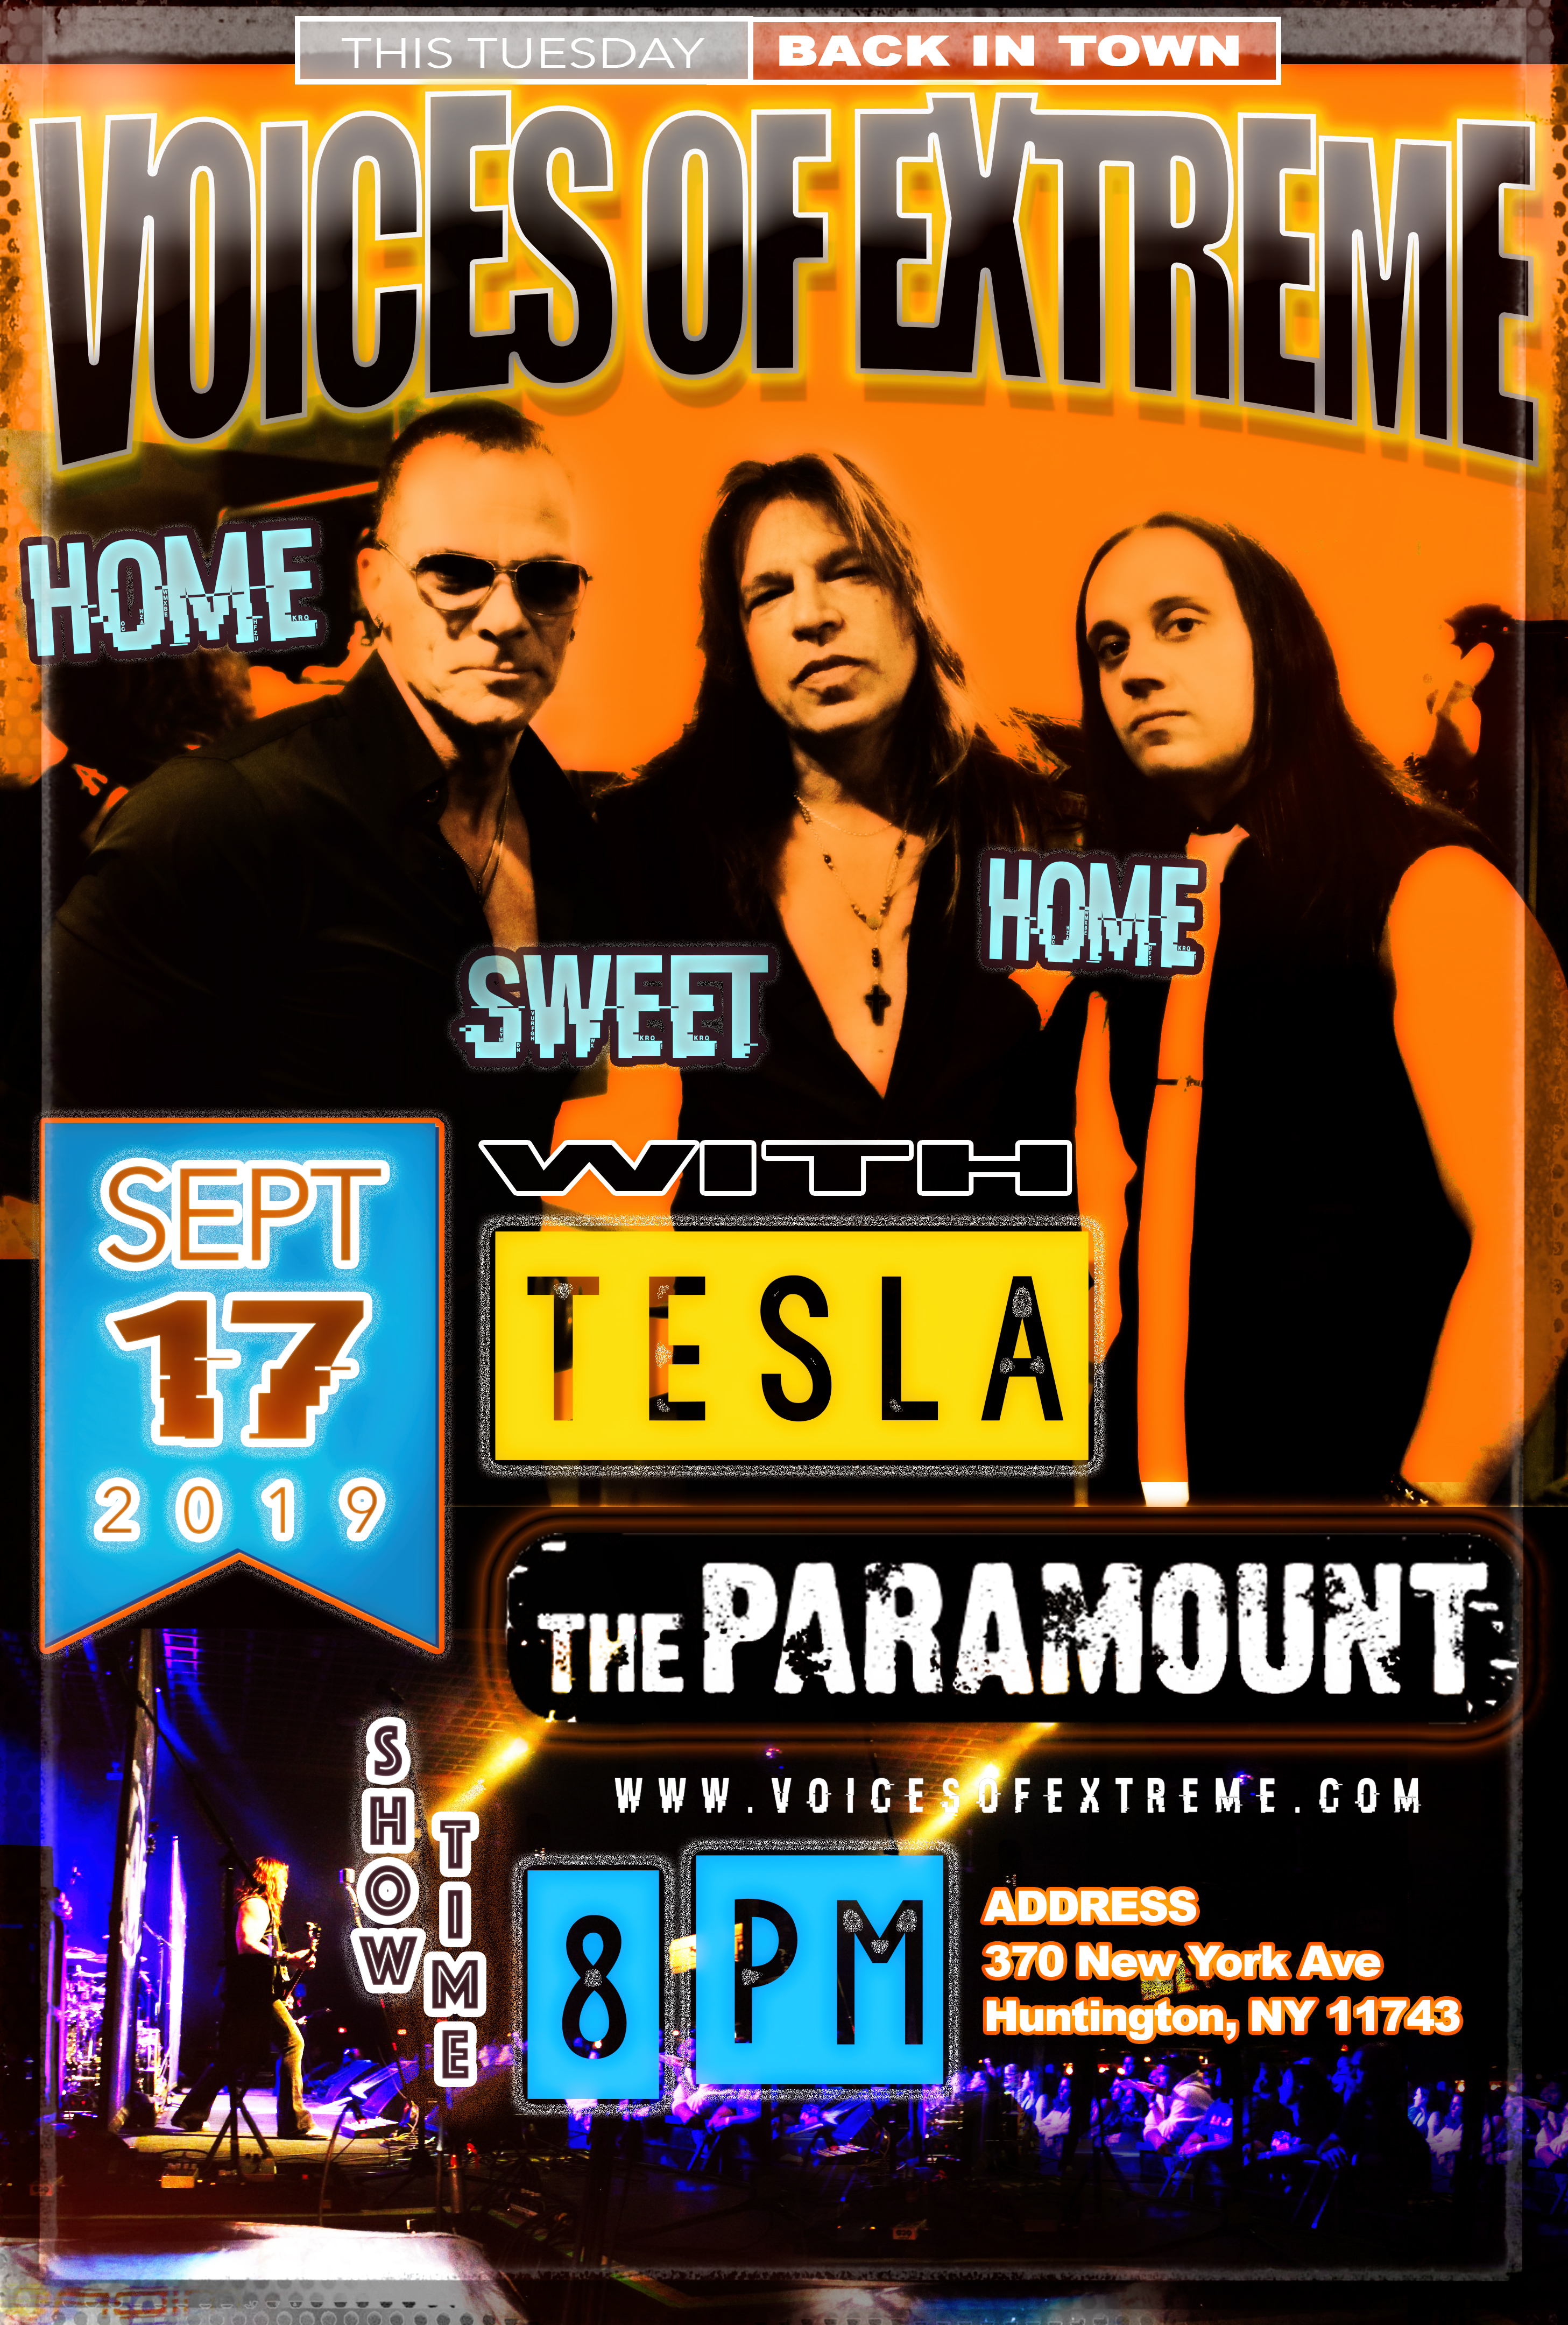 VOICES-OF-EXTREME-ON-TOUR-POSTER-2019-TESLA-THE-BAND-DON-CHAFFIN-BOBBY-BRENNAN-JORDAN-CANNATA-THE-PARAMOUNT